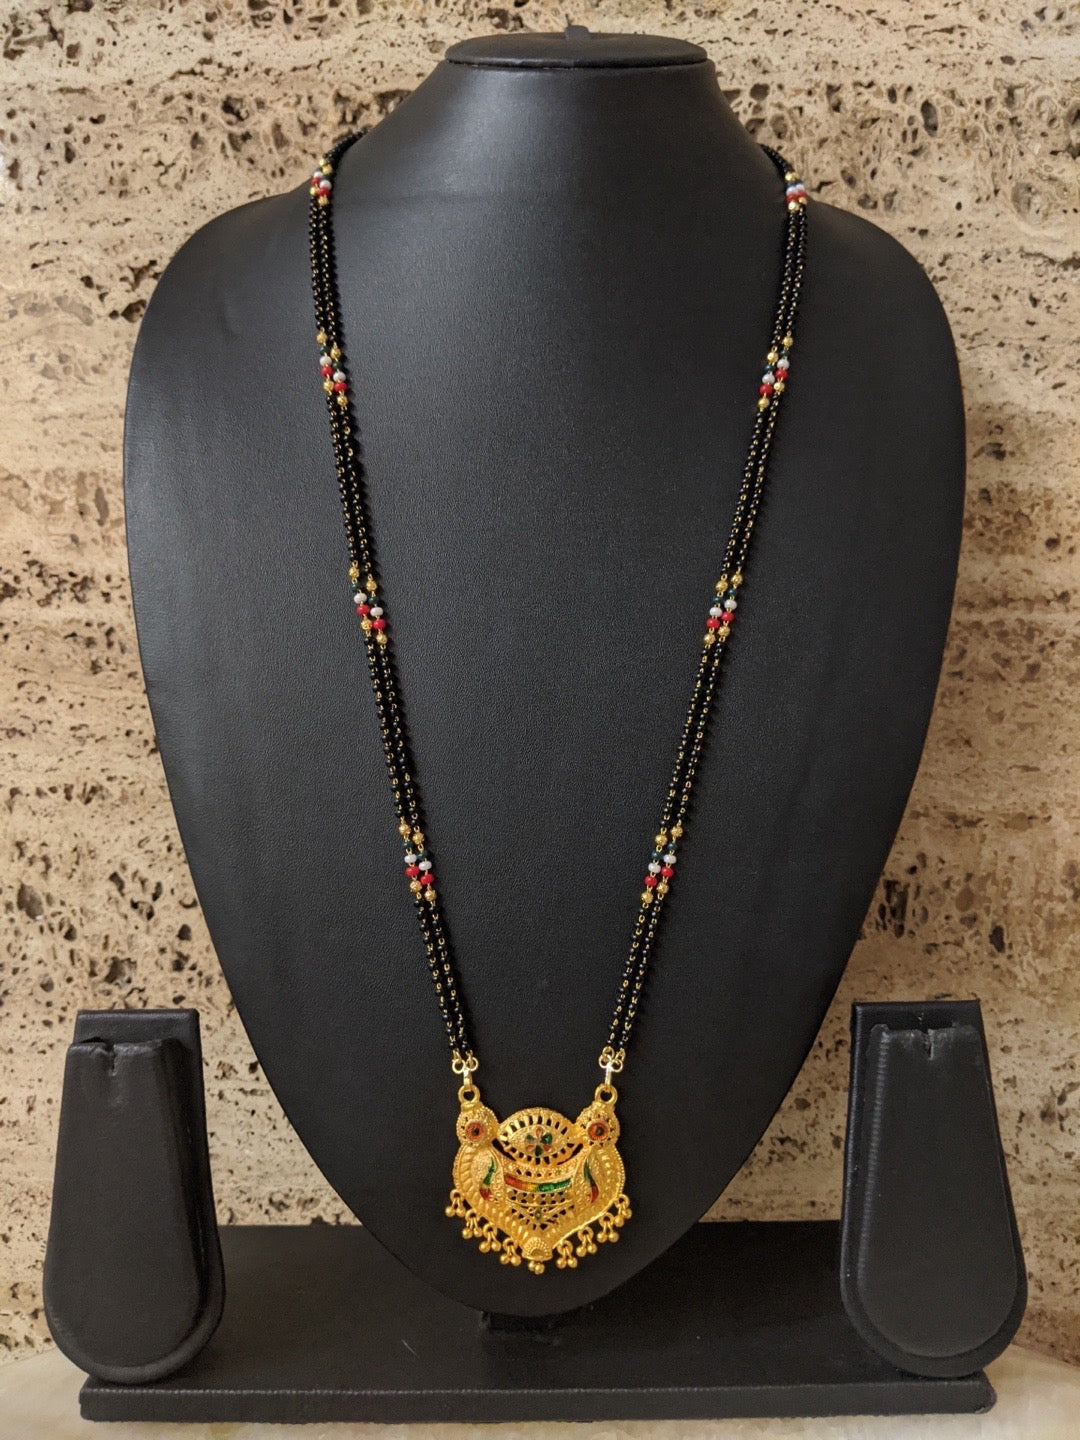 image for Maharashtrian Long Mangalsutra Designs Gold Pendant With Ghungroo Red Green Gold & Black Beads Chain